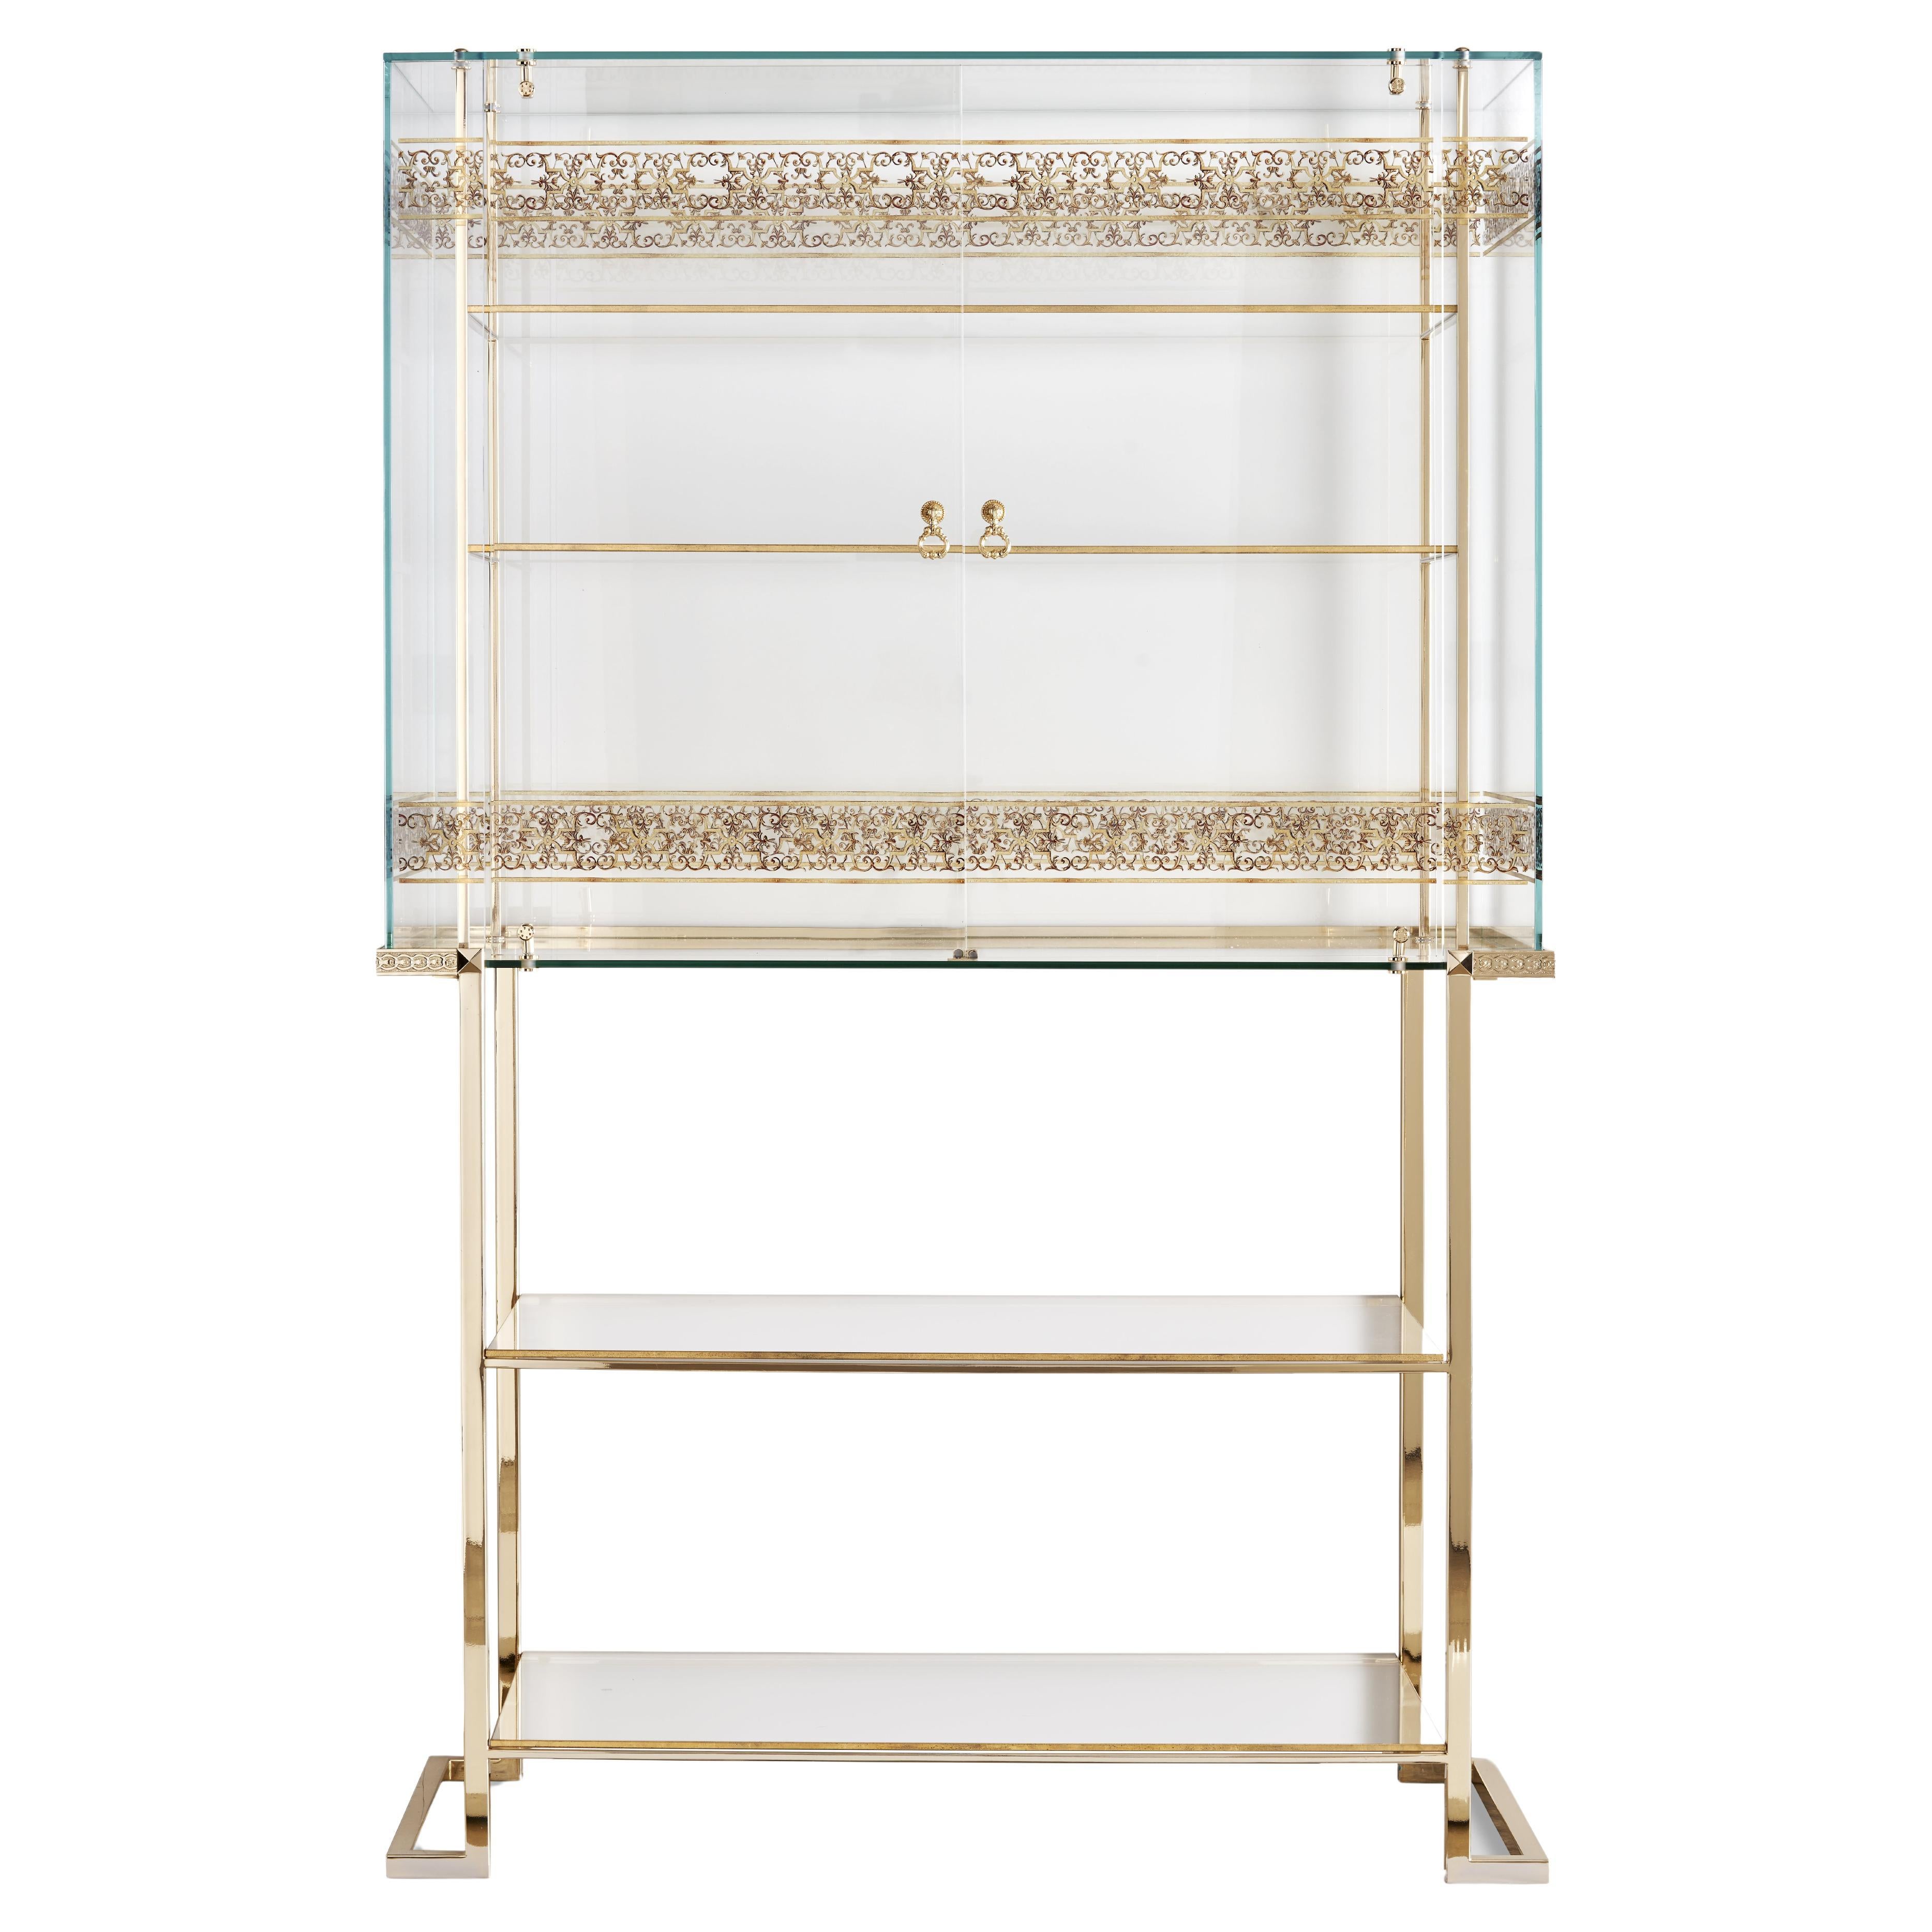 Neoclassical metal display case with gold24kt electroplating finish and decorated glass EL238